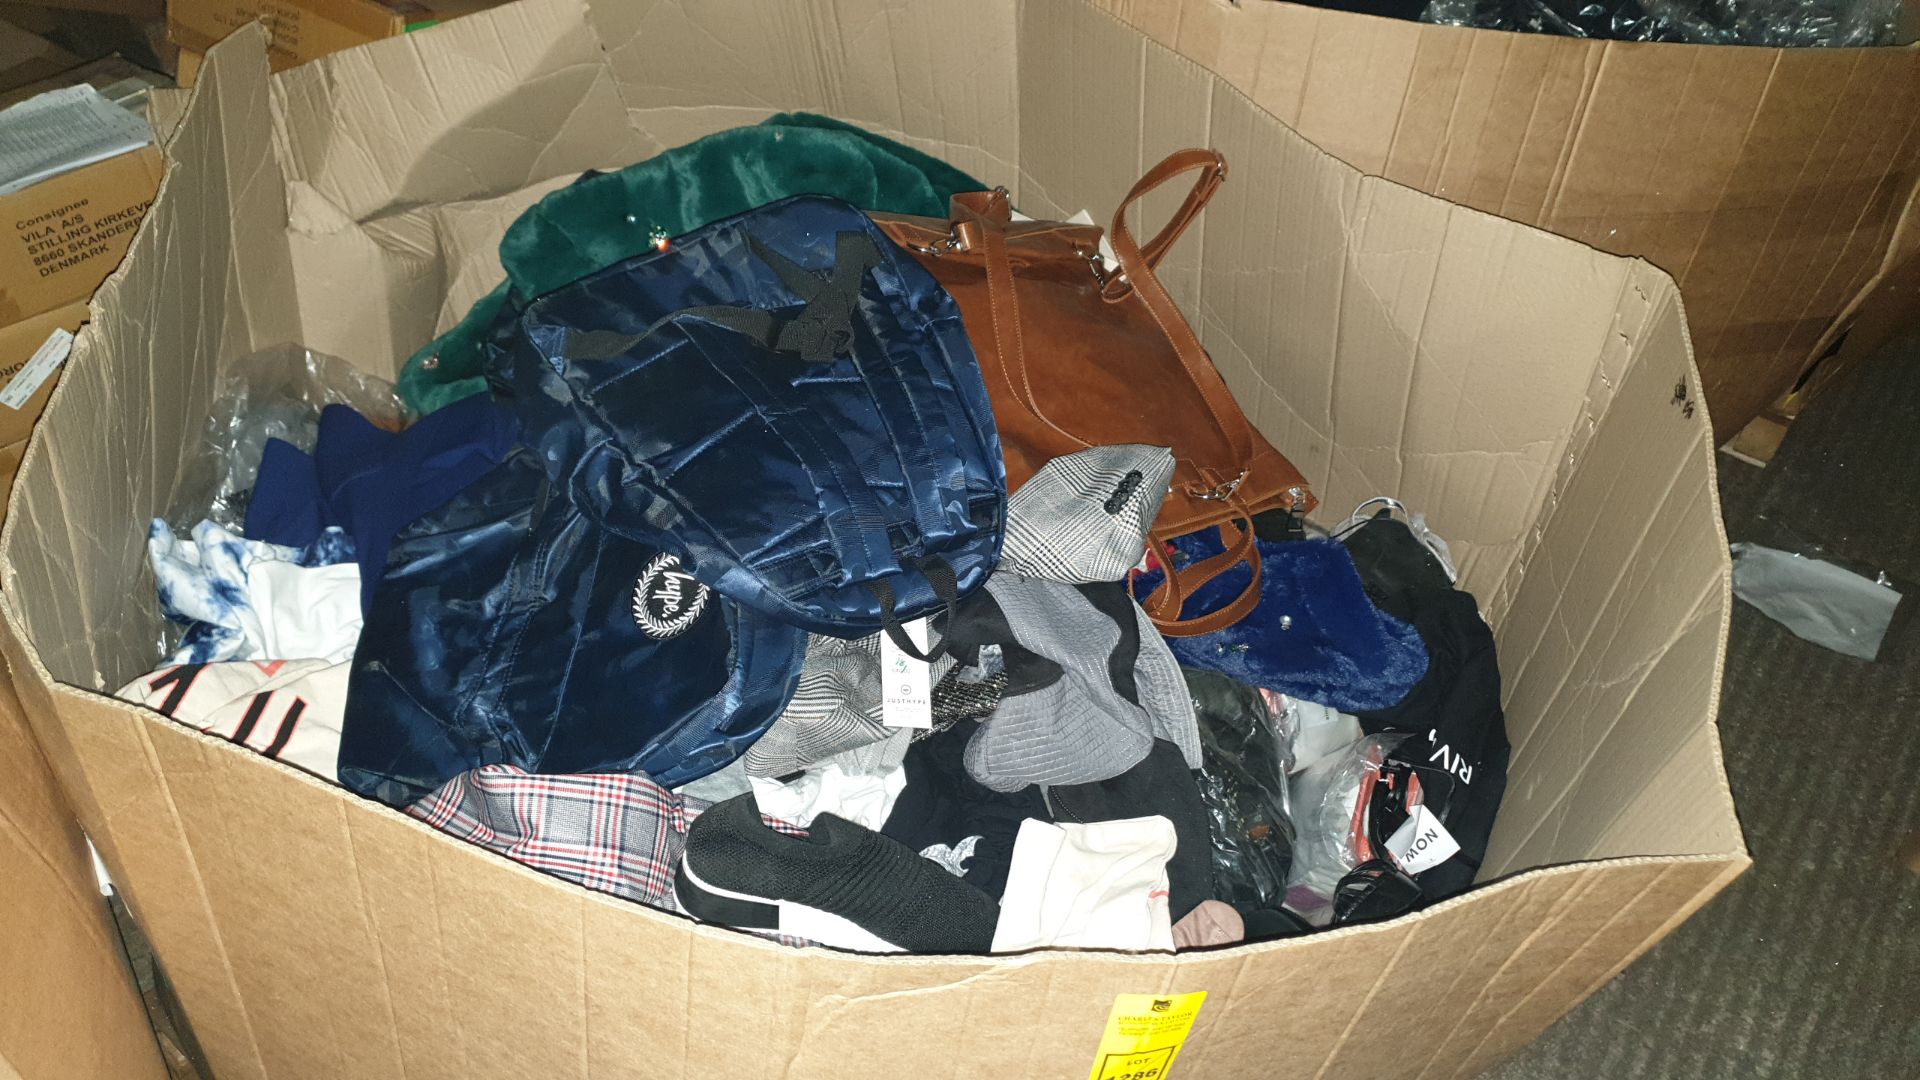 FULL PALLET CONTAINING LARGE QUANTITY OF CLOTHING I.E HOLLISTER JUMPERS, T-SHIRTS, HYPE BAGS,